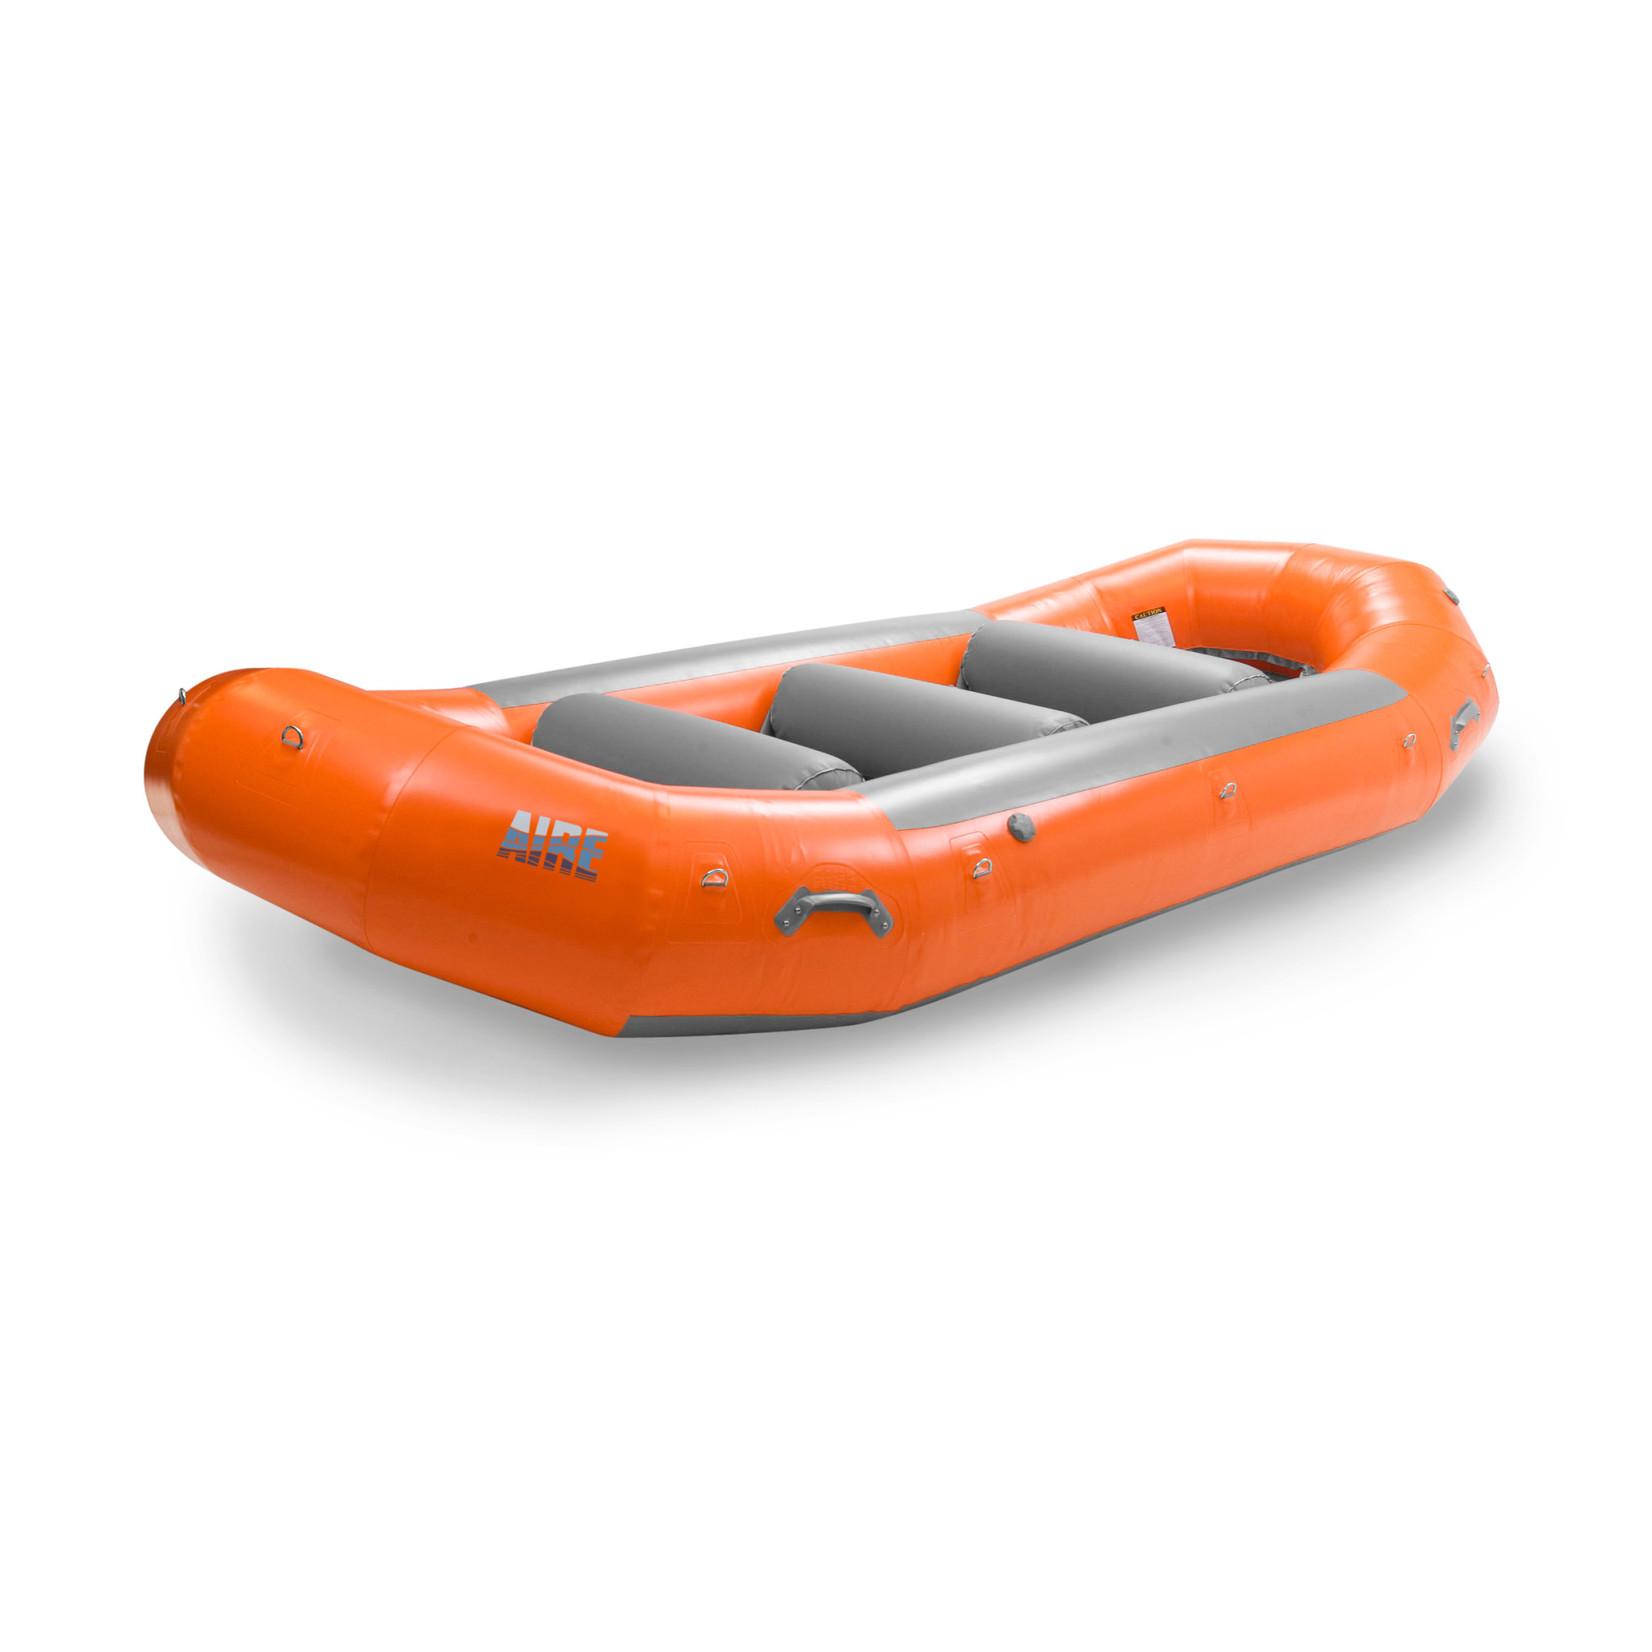 AIRE AIRE 130R Self-Bailing Raft